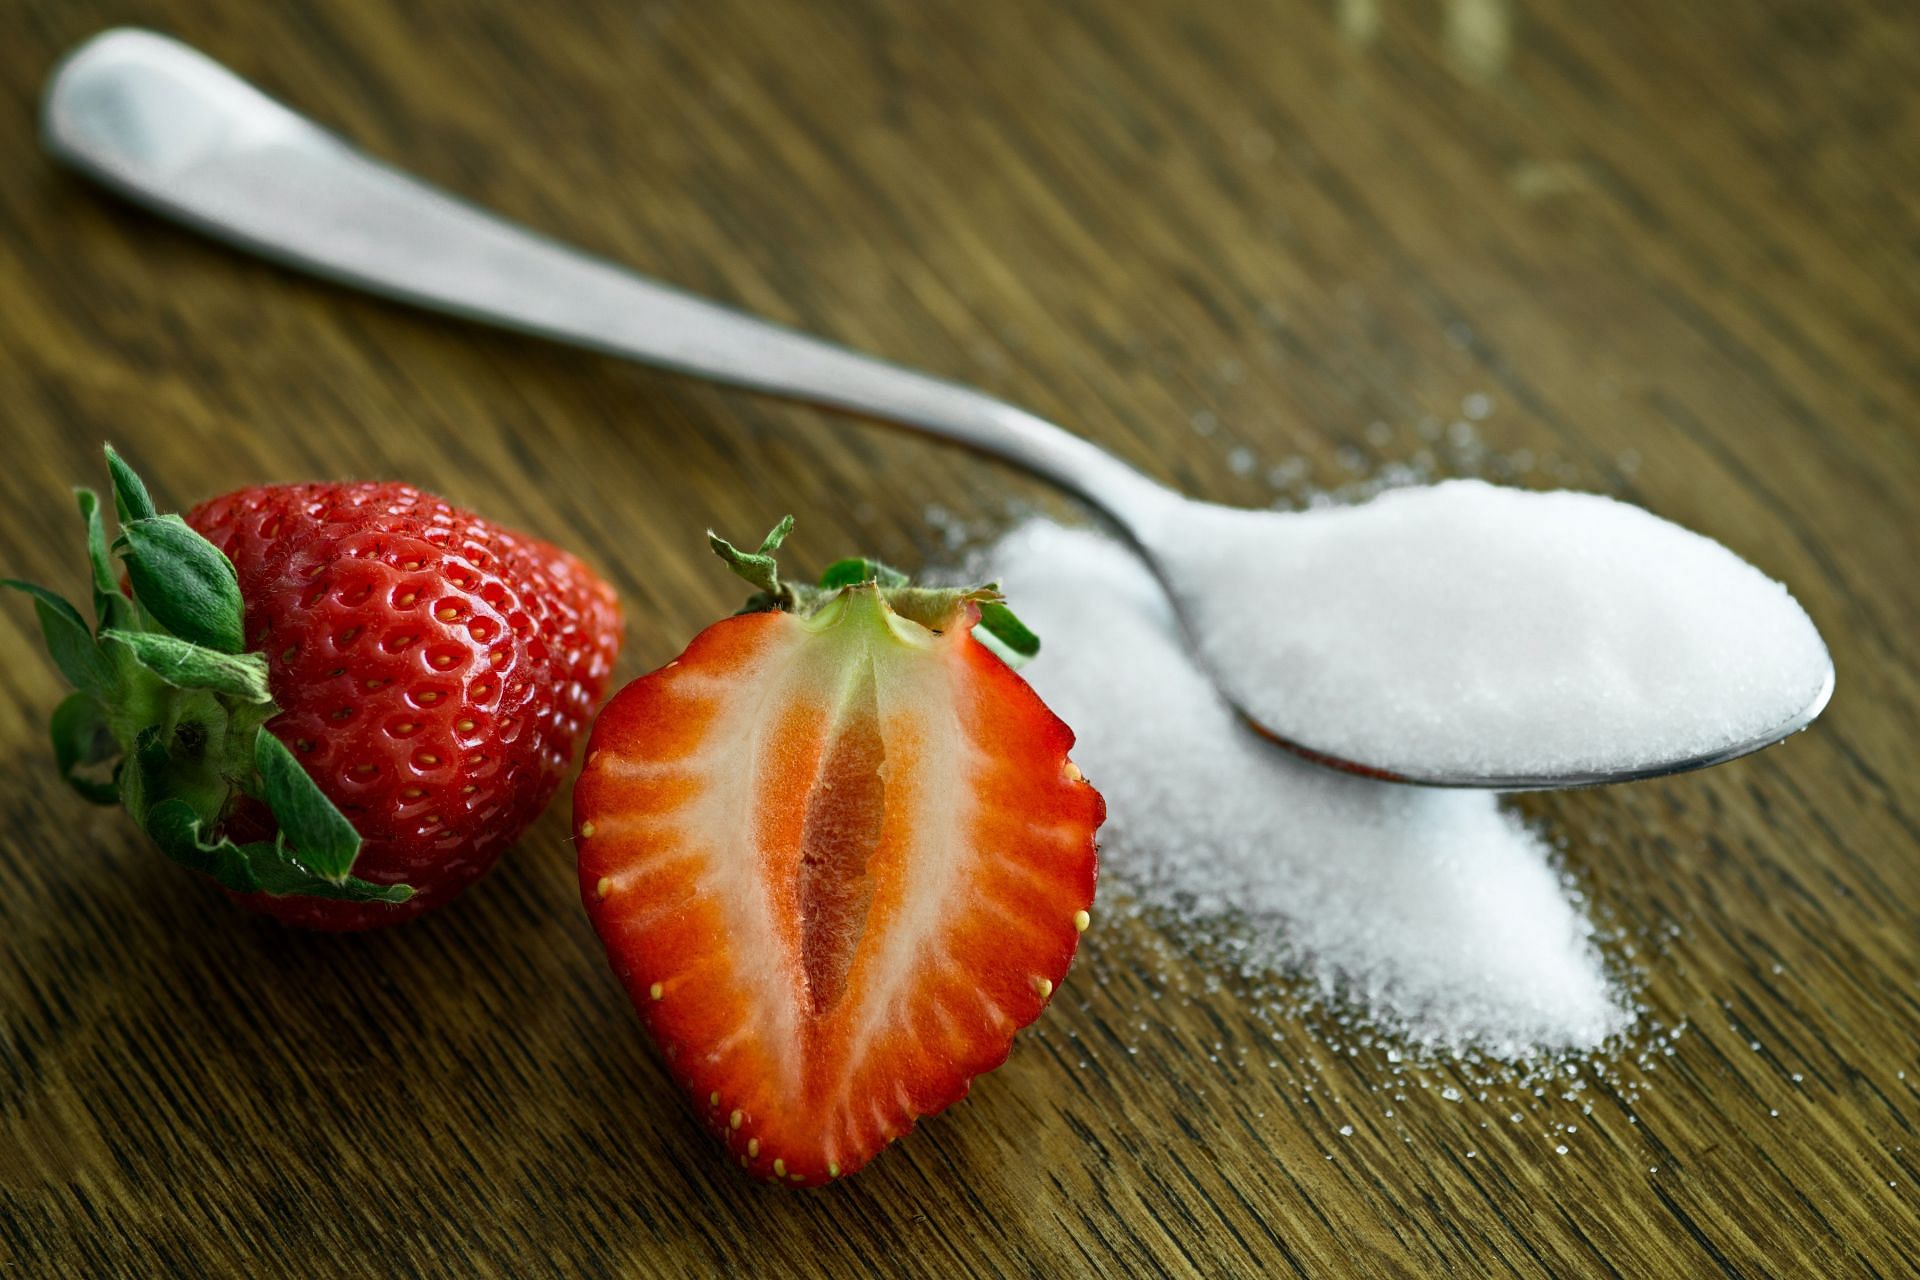 one teaspoon of sugar can supply about 100 calories of fuel. (Image via Pexels / Mali Maeder)